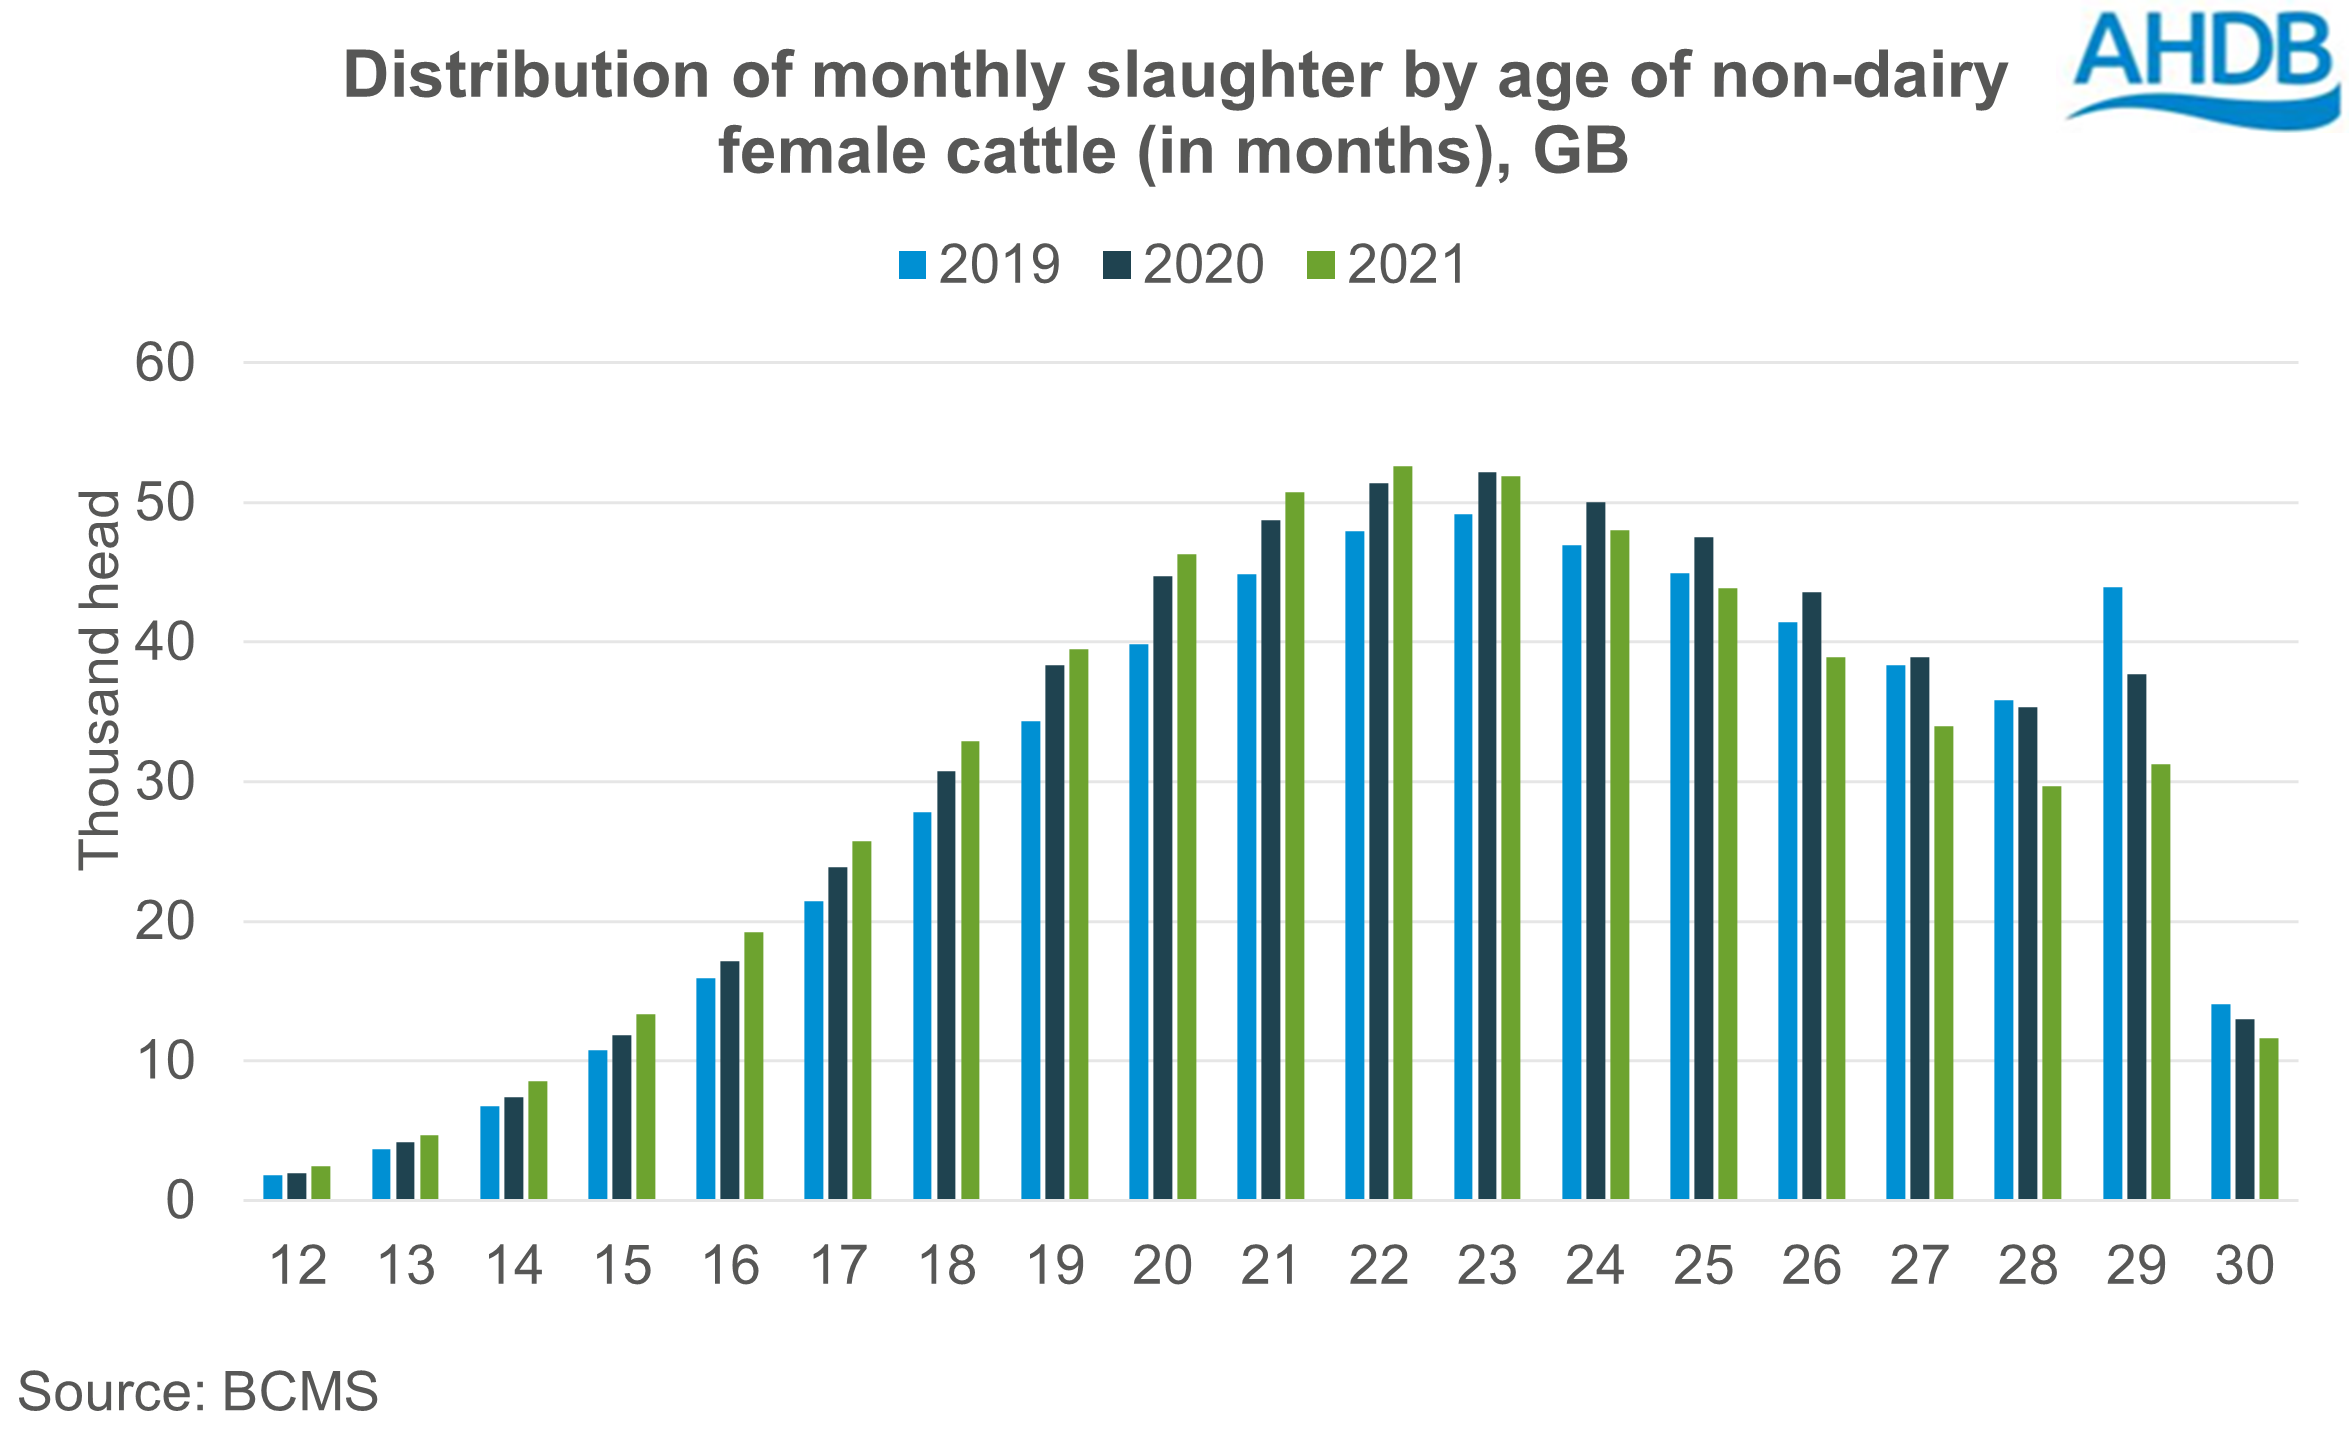 chart showing distribution of monthly cattle slaughter by age in months GB - non dairy females